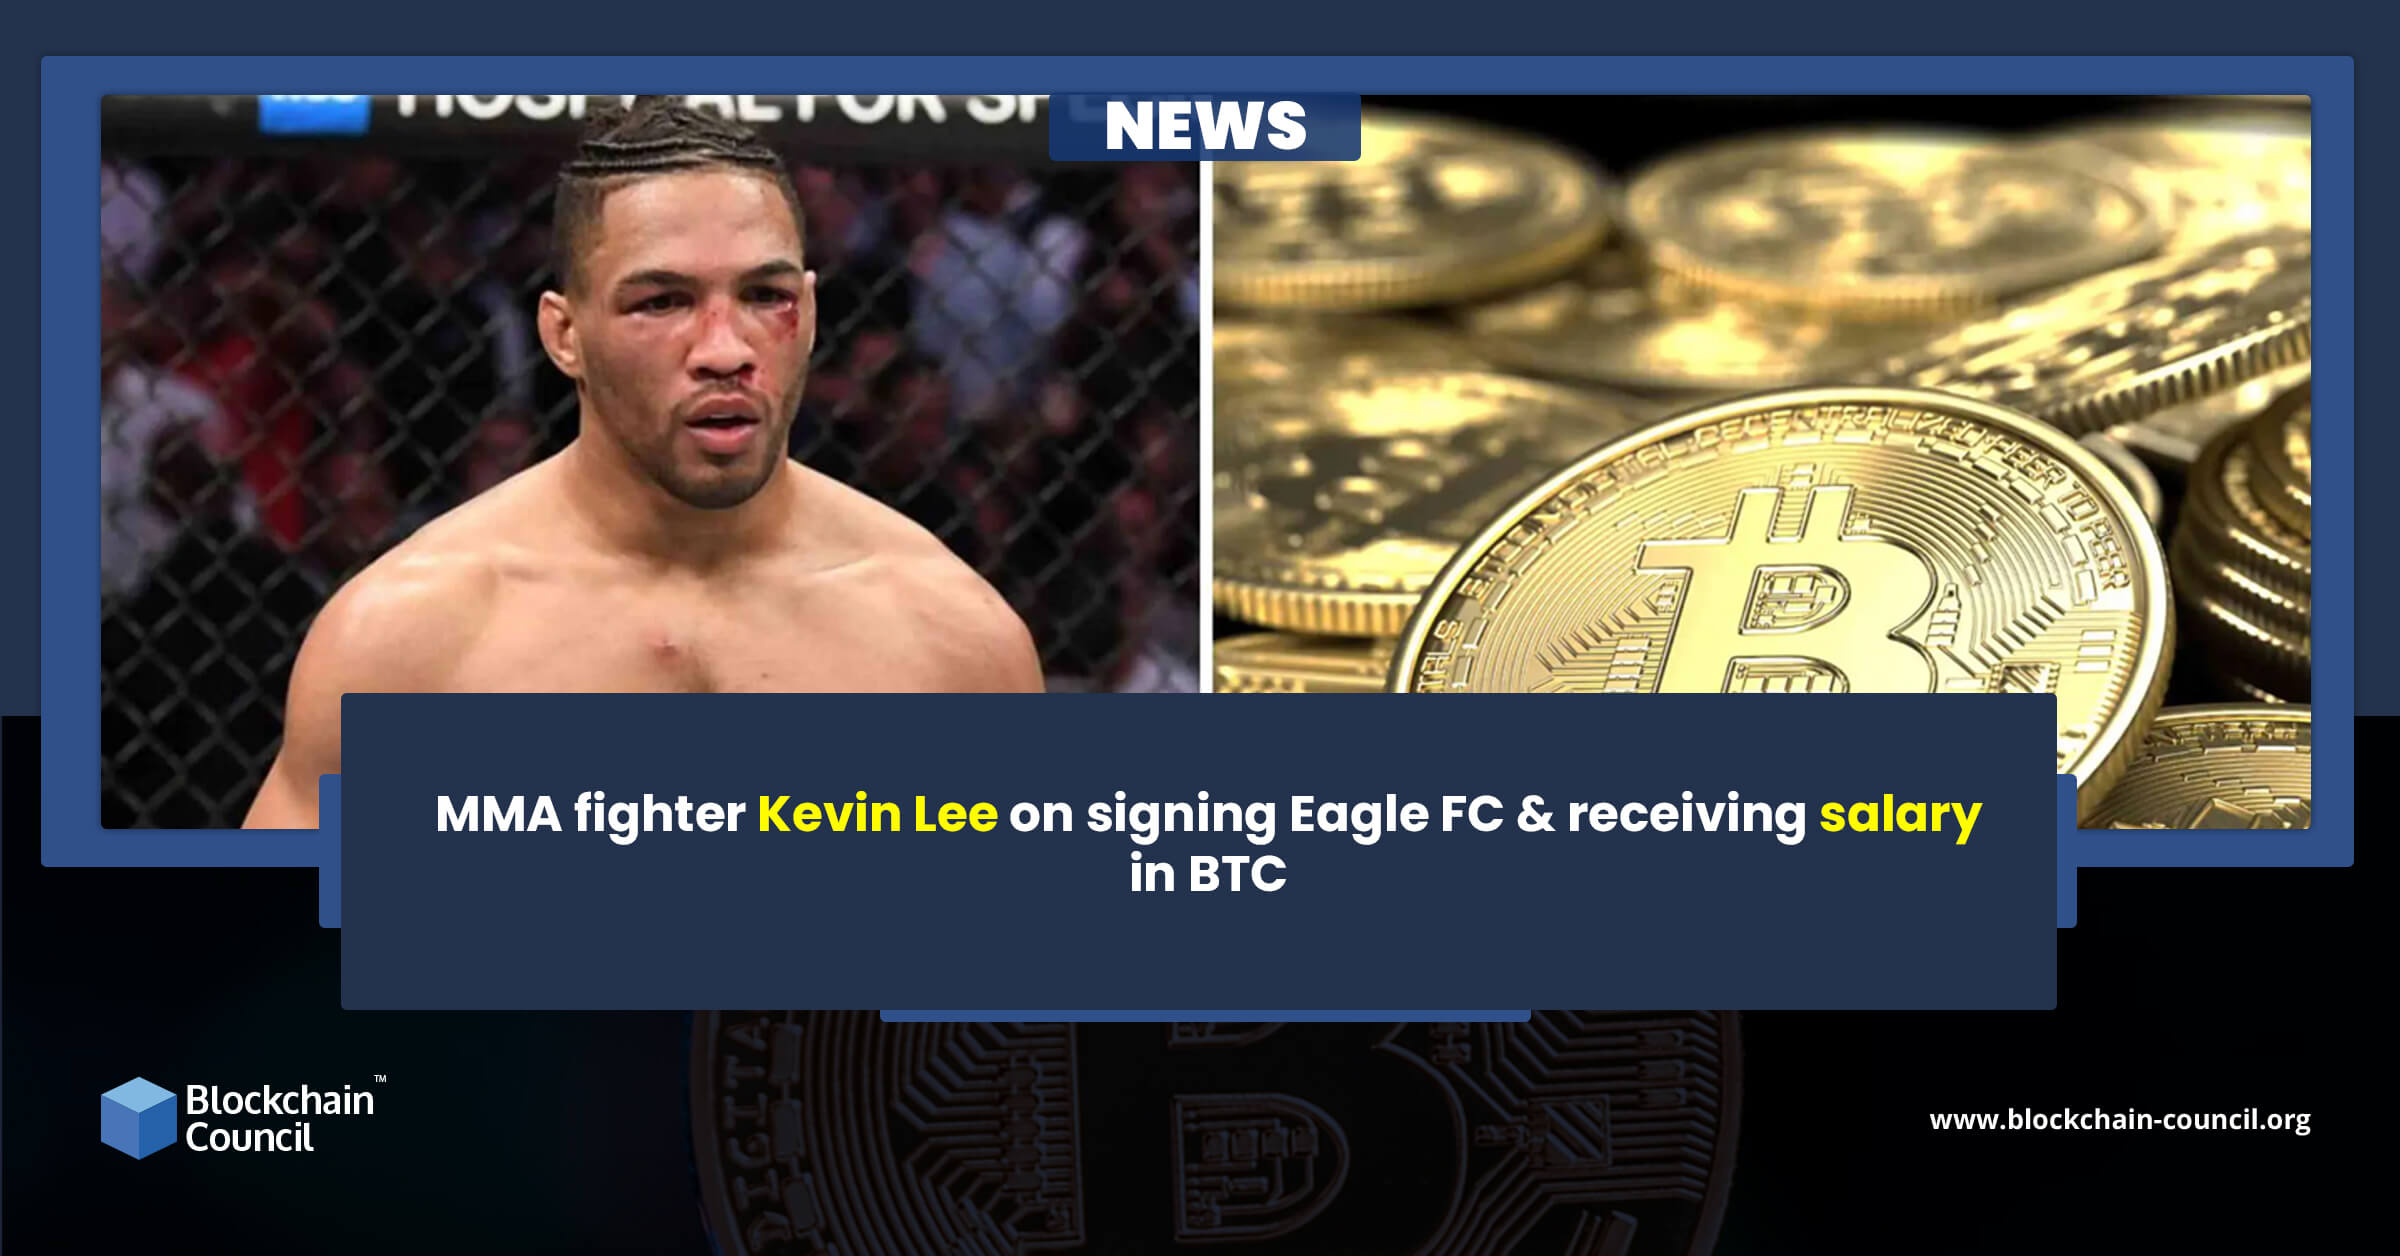 MMA fighter Kevin Lee on signing Eagle FC & receiving salary in BTC